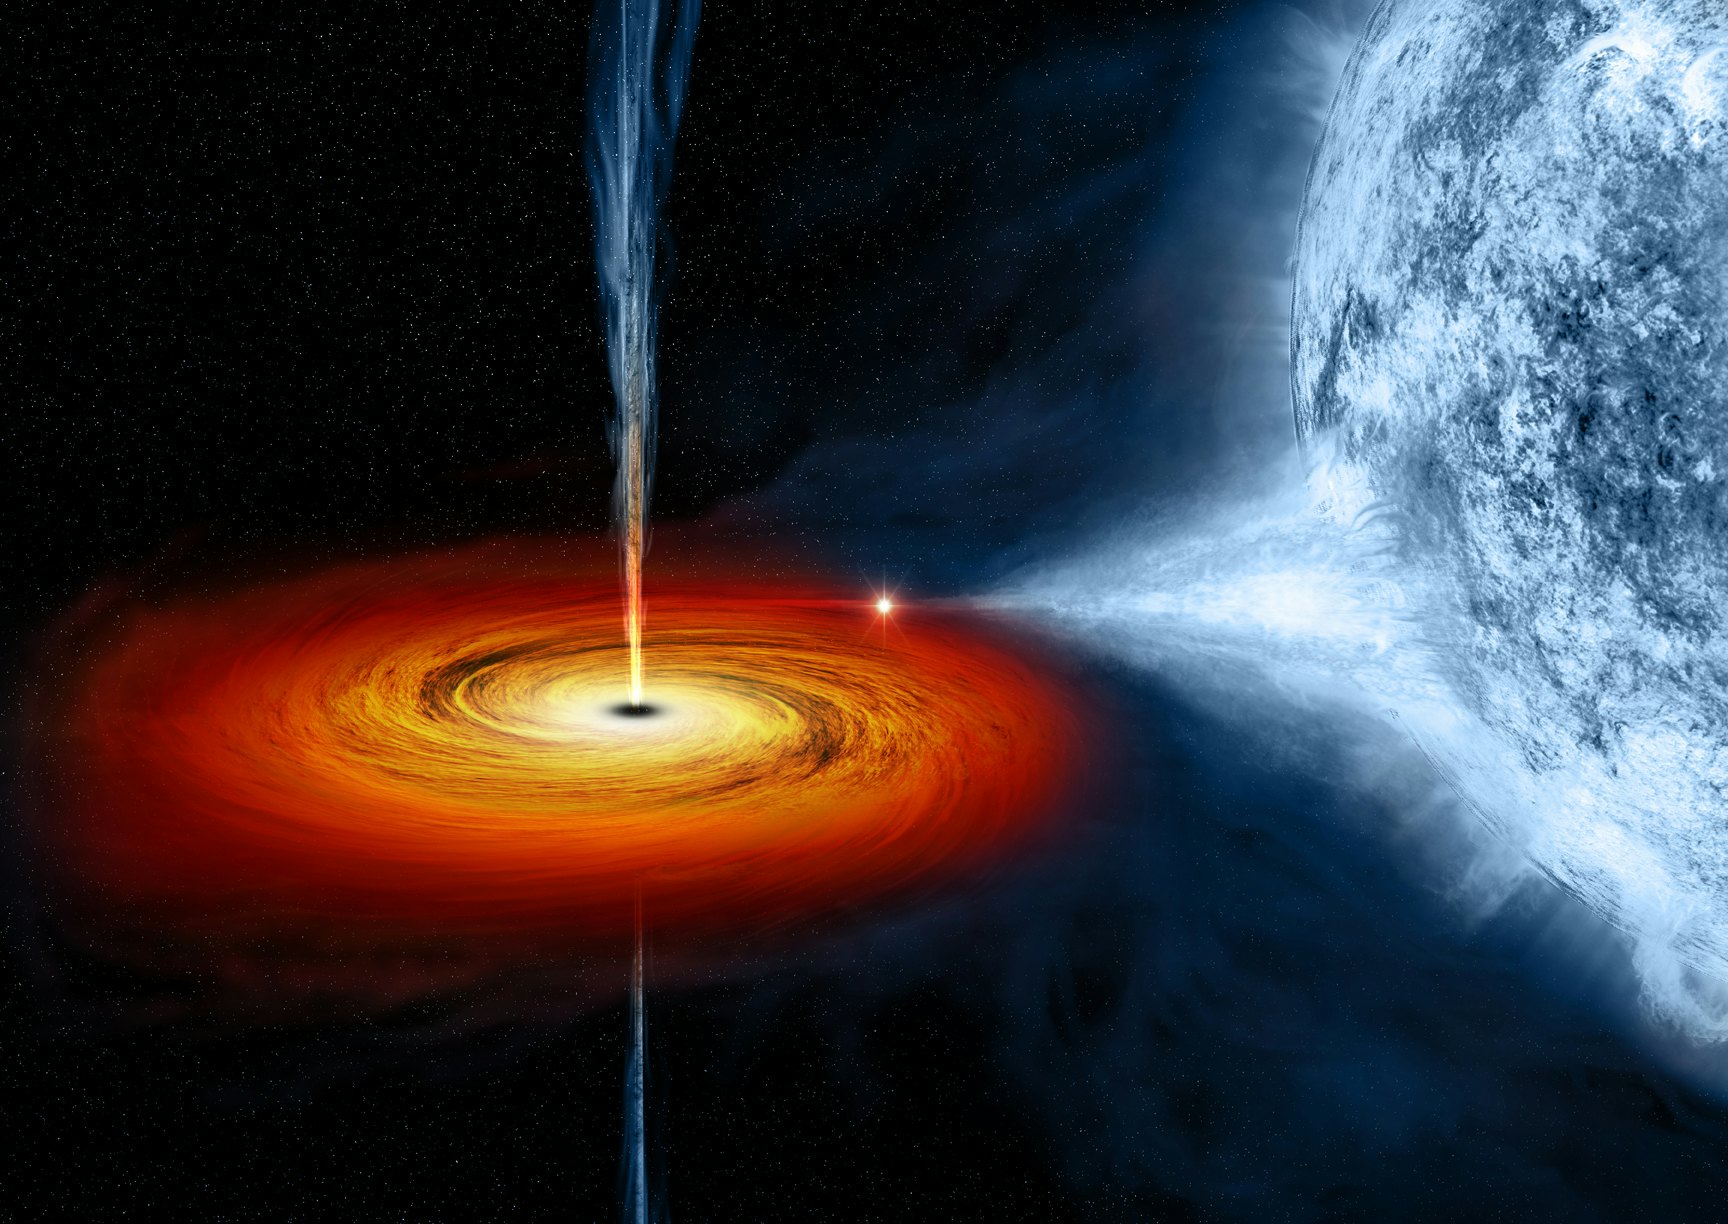 would you die if you went into a black hole